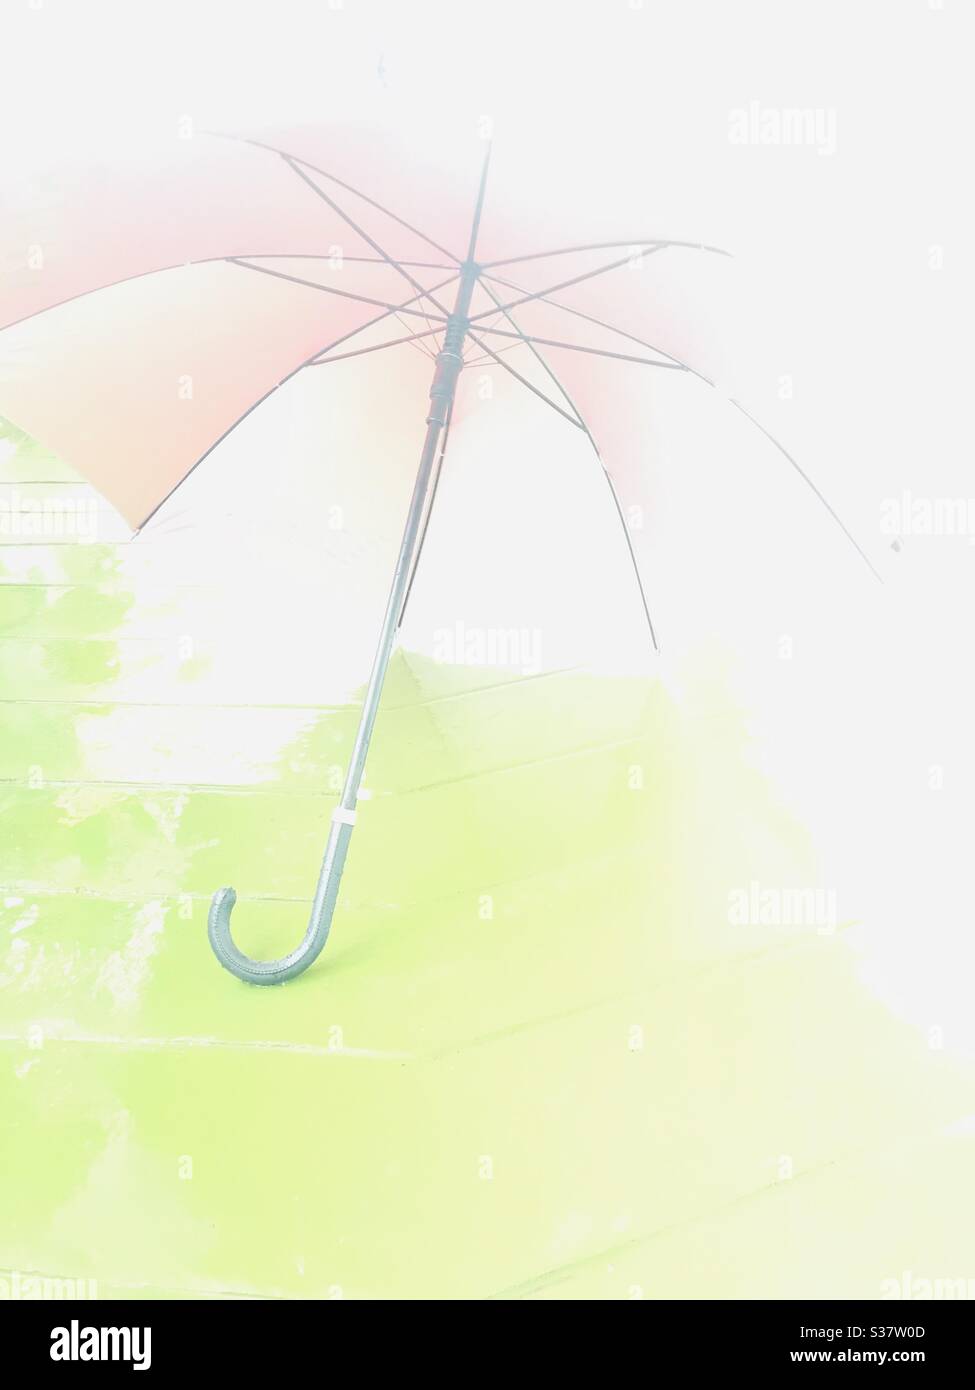 Edited image -of a wet umbrella on a rainy day Stock Photo